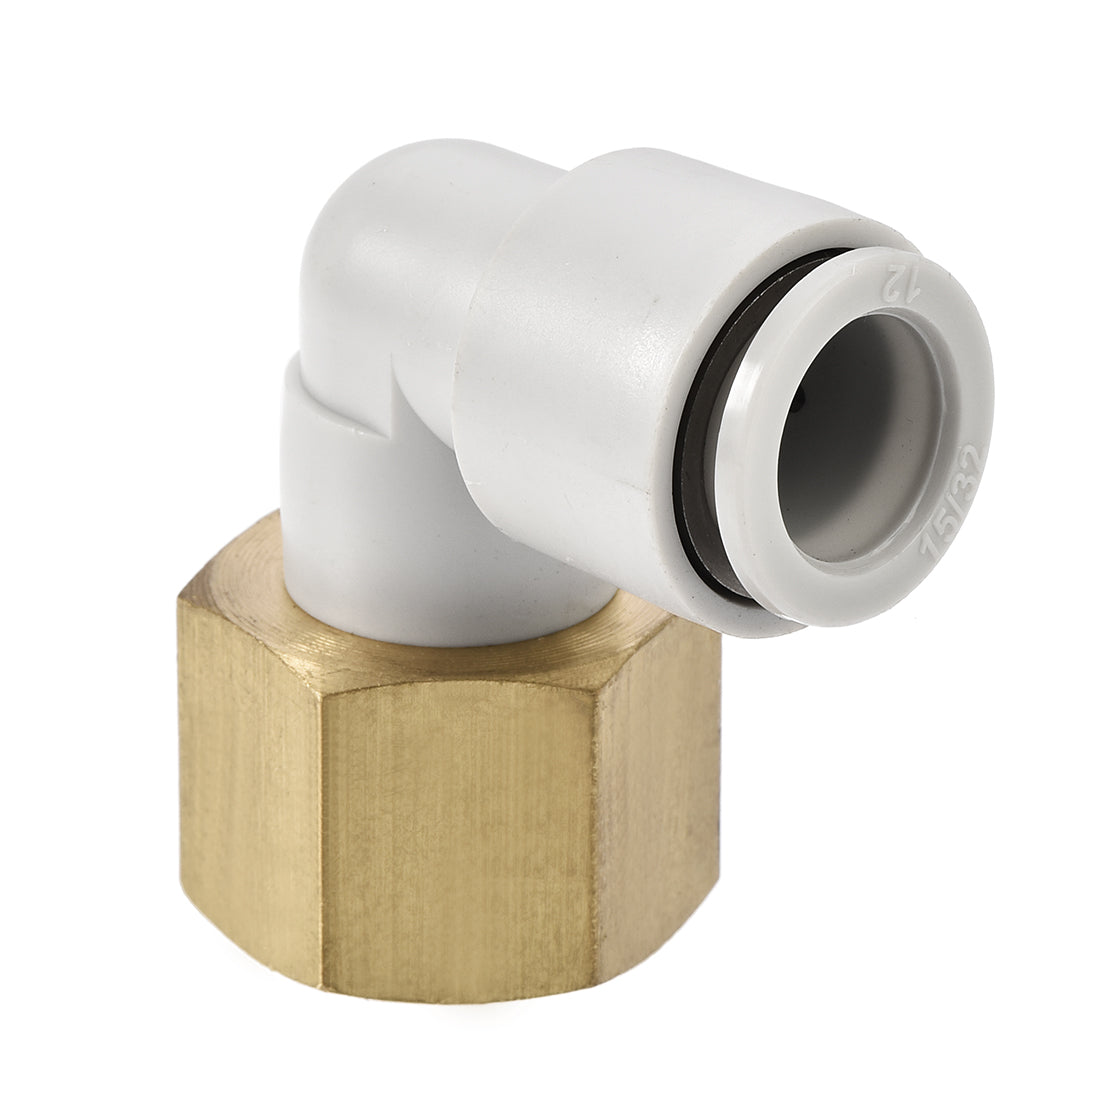 uxcell Uxcell Pneumatic Push to Connect Tube Fittings Elbow 12mm Tube OD x 1/2PT Female